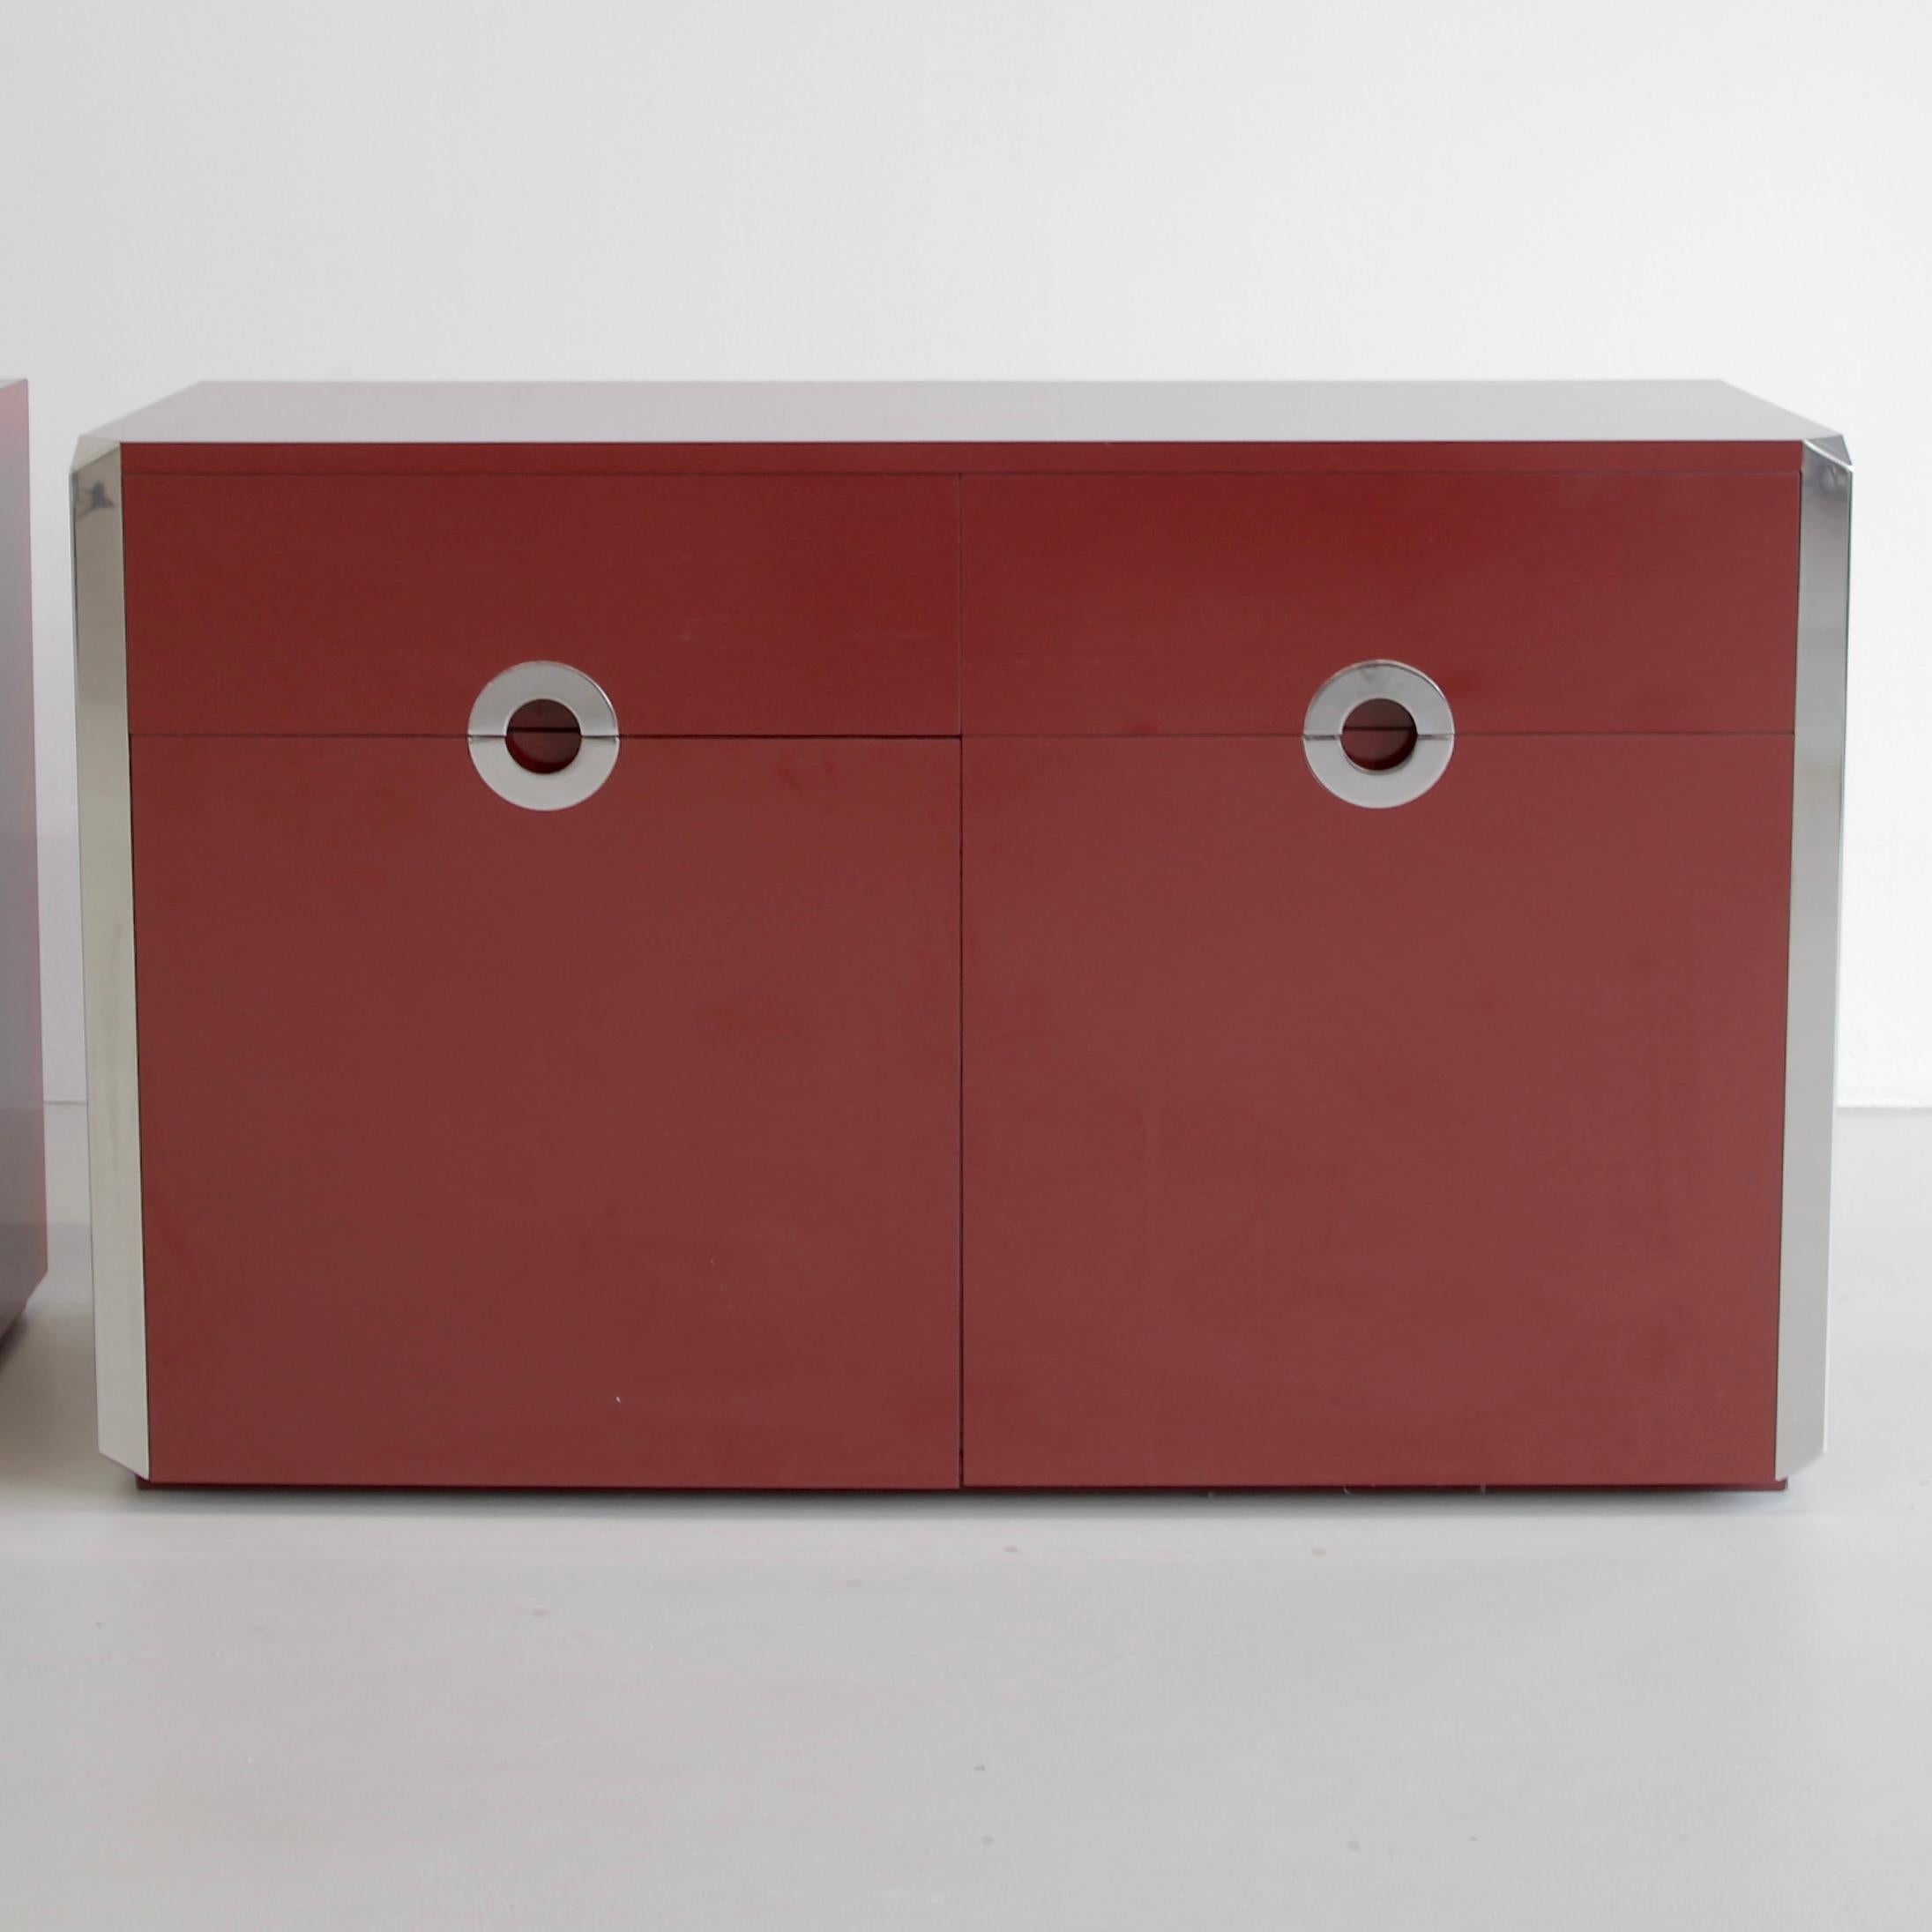 Two-door sideboard designed by Willy Rizzo. Italy, Maria Sabot, 1972.

Dark red laminate and chrome detailed sideboard designed by Willy Rizzo and produced by Mario Sabot. Two doors and two drawers, including a built-in Fridge by Frigomatic (the